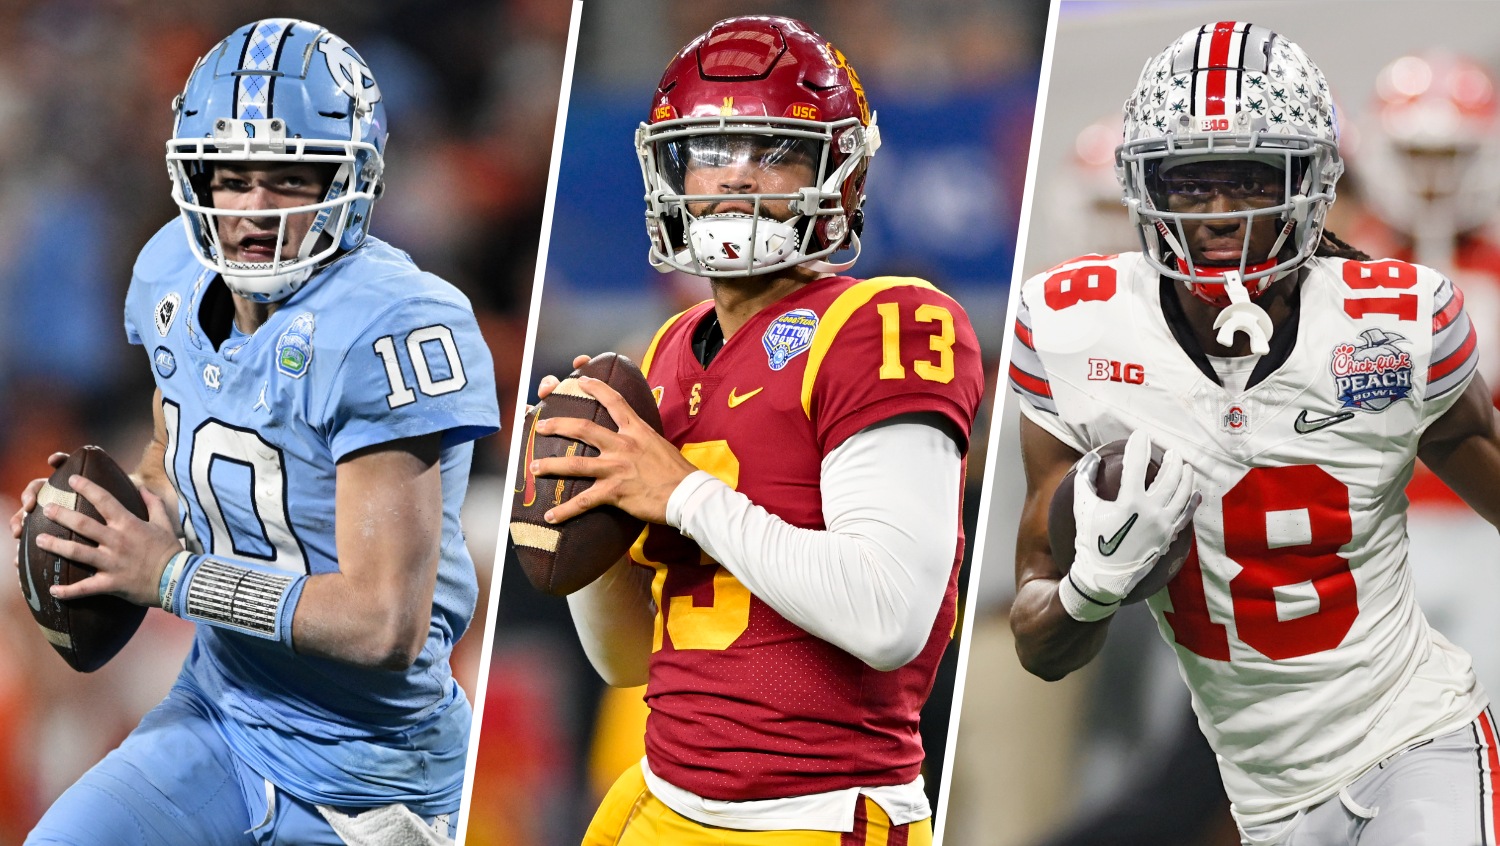 Williams, Harrison, Maye are top prospects in 2024 NFL draft